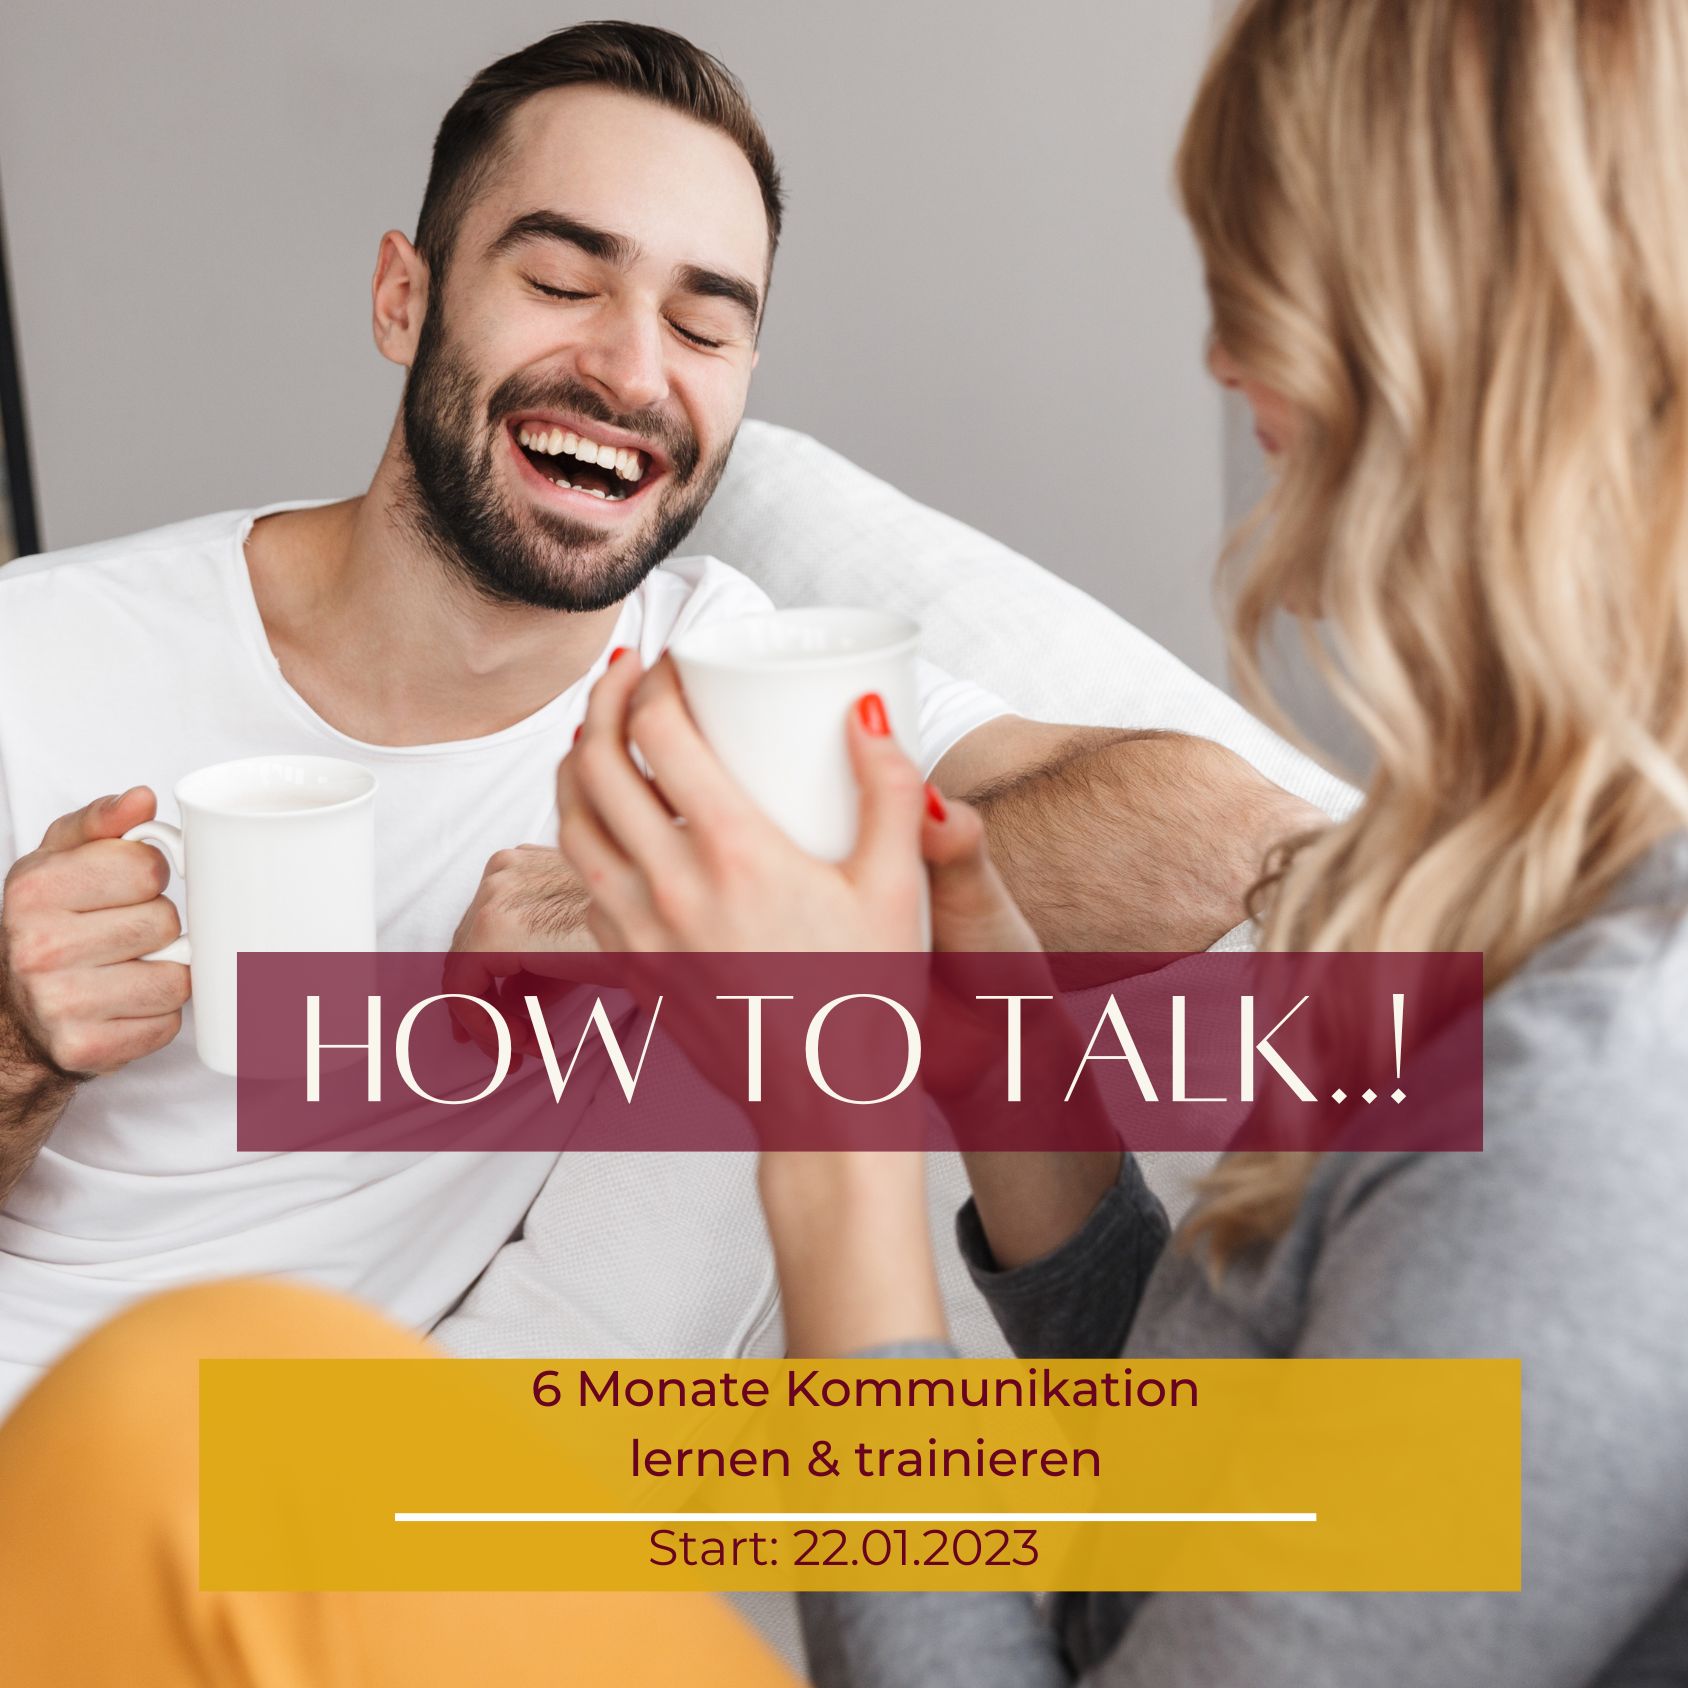 How to talk